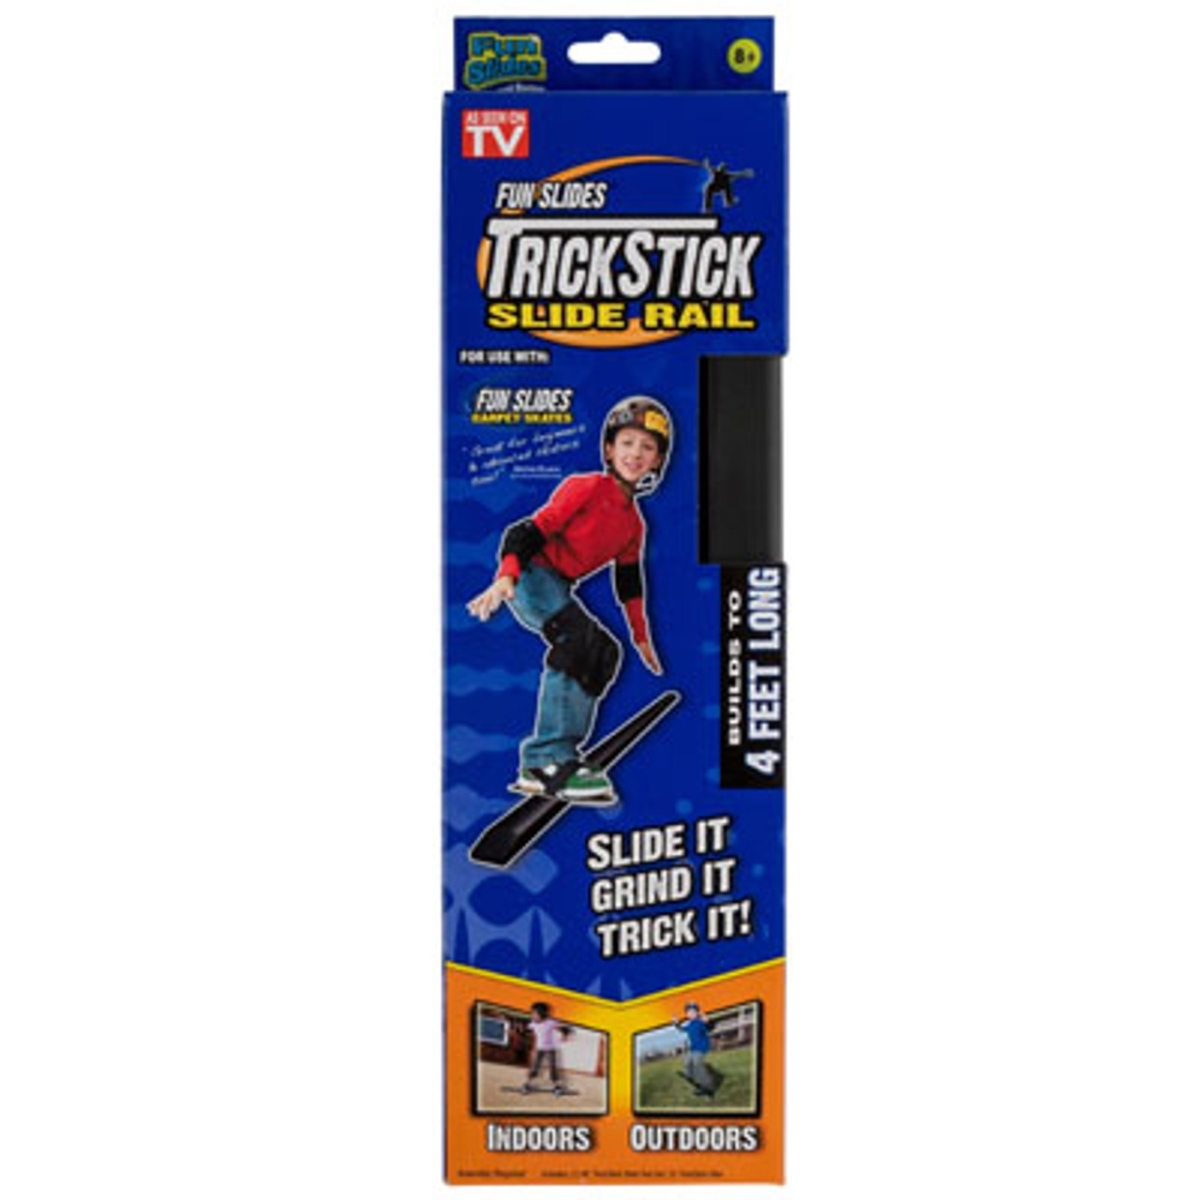 Picture of Regent Products 350 Fun Slides Trick Stix Slide Rail to 4 ft. Long Indoor & Outdoor